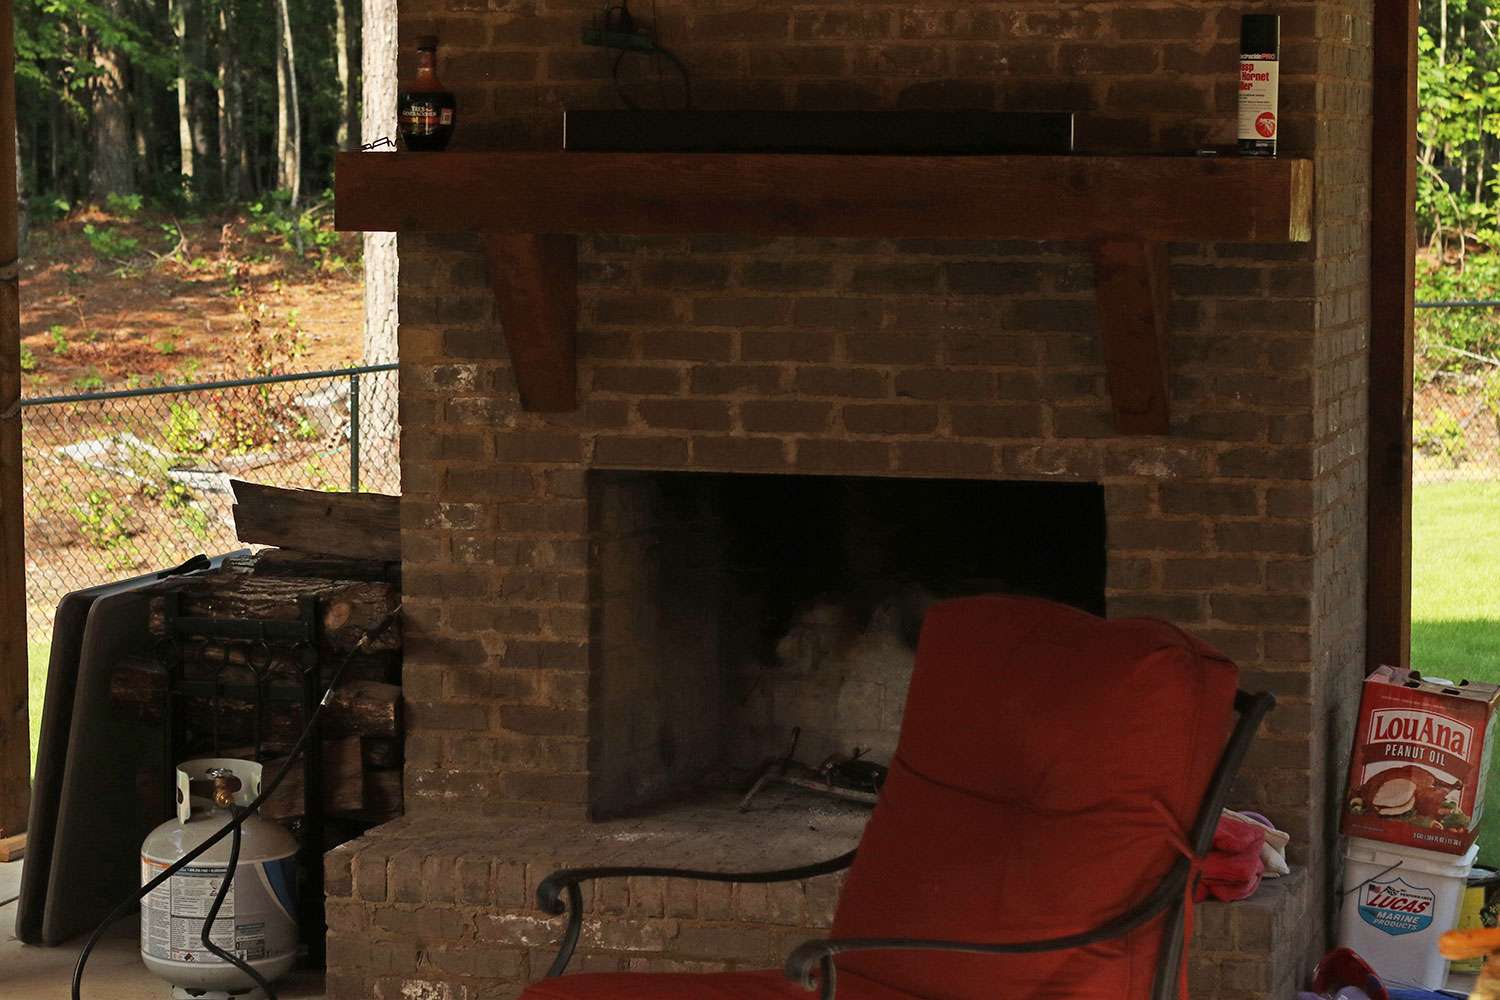 The outdoor fireplace gets lit once the temperatures cool down.